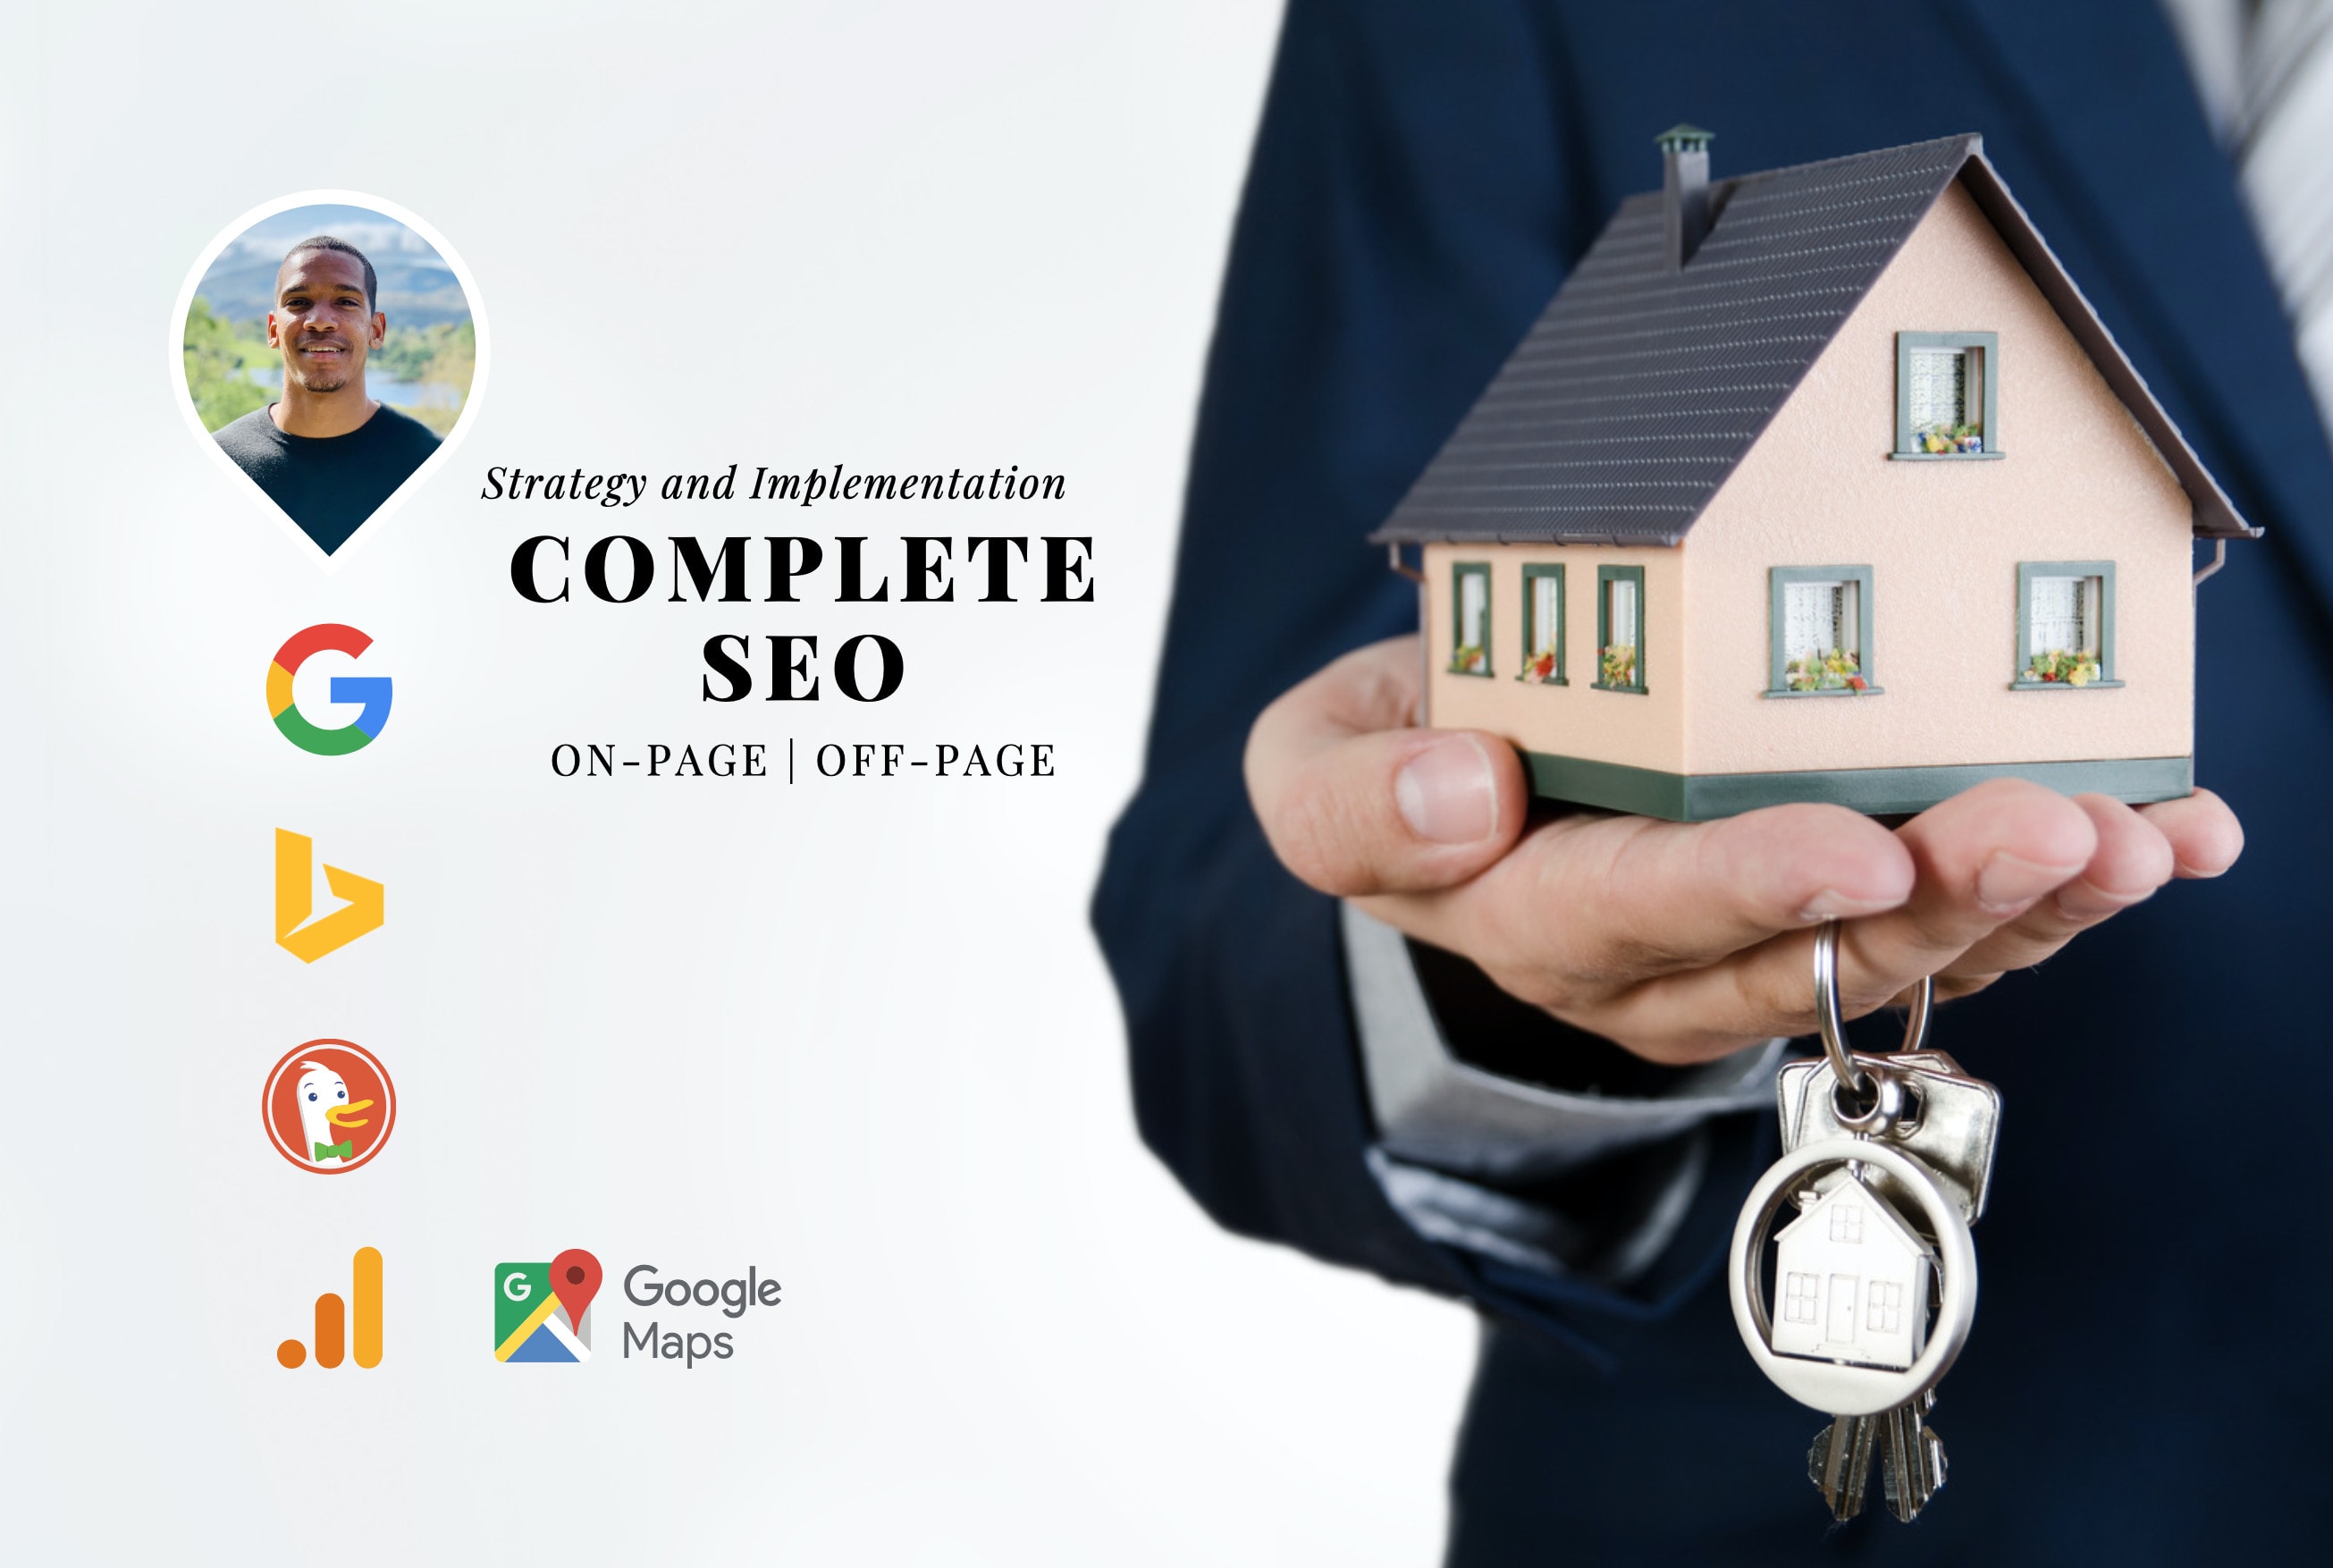 9 Real Estate Seo Tips to Generate Leads